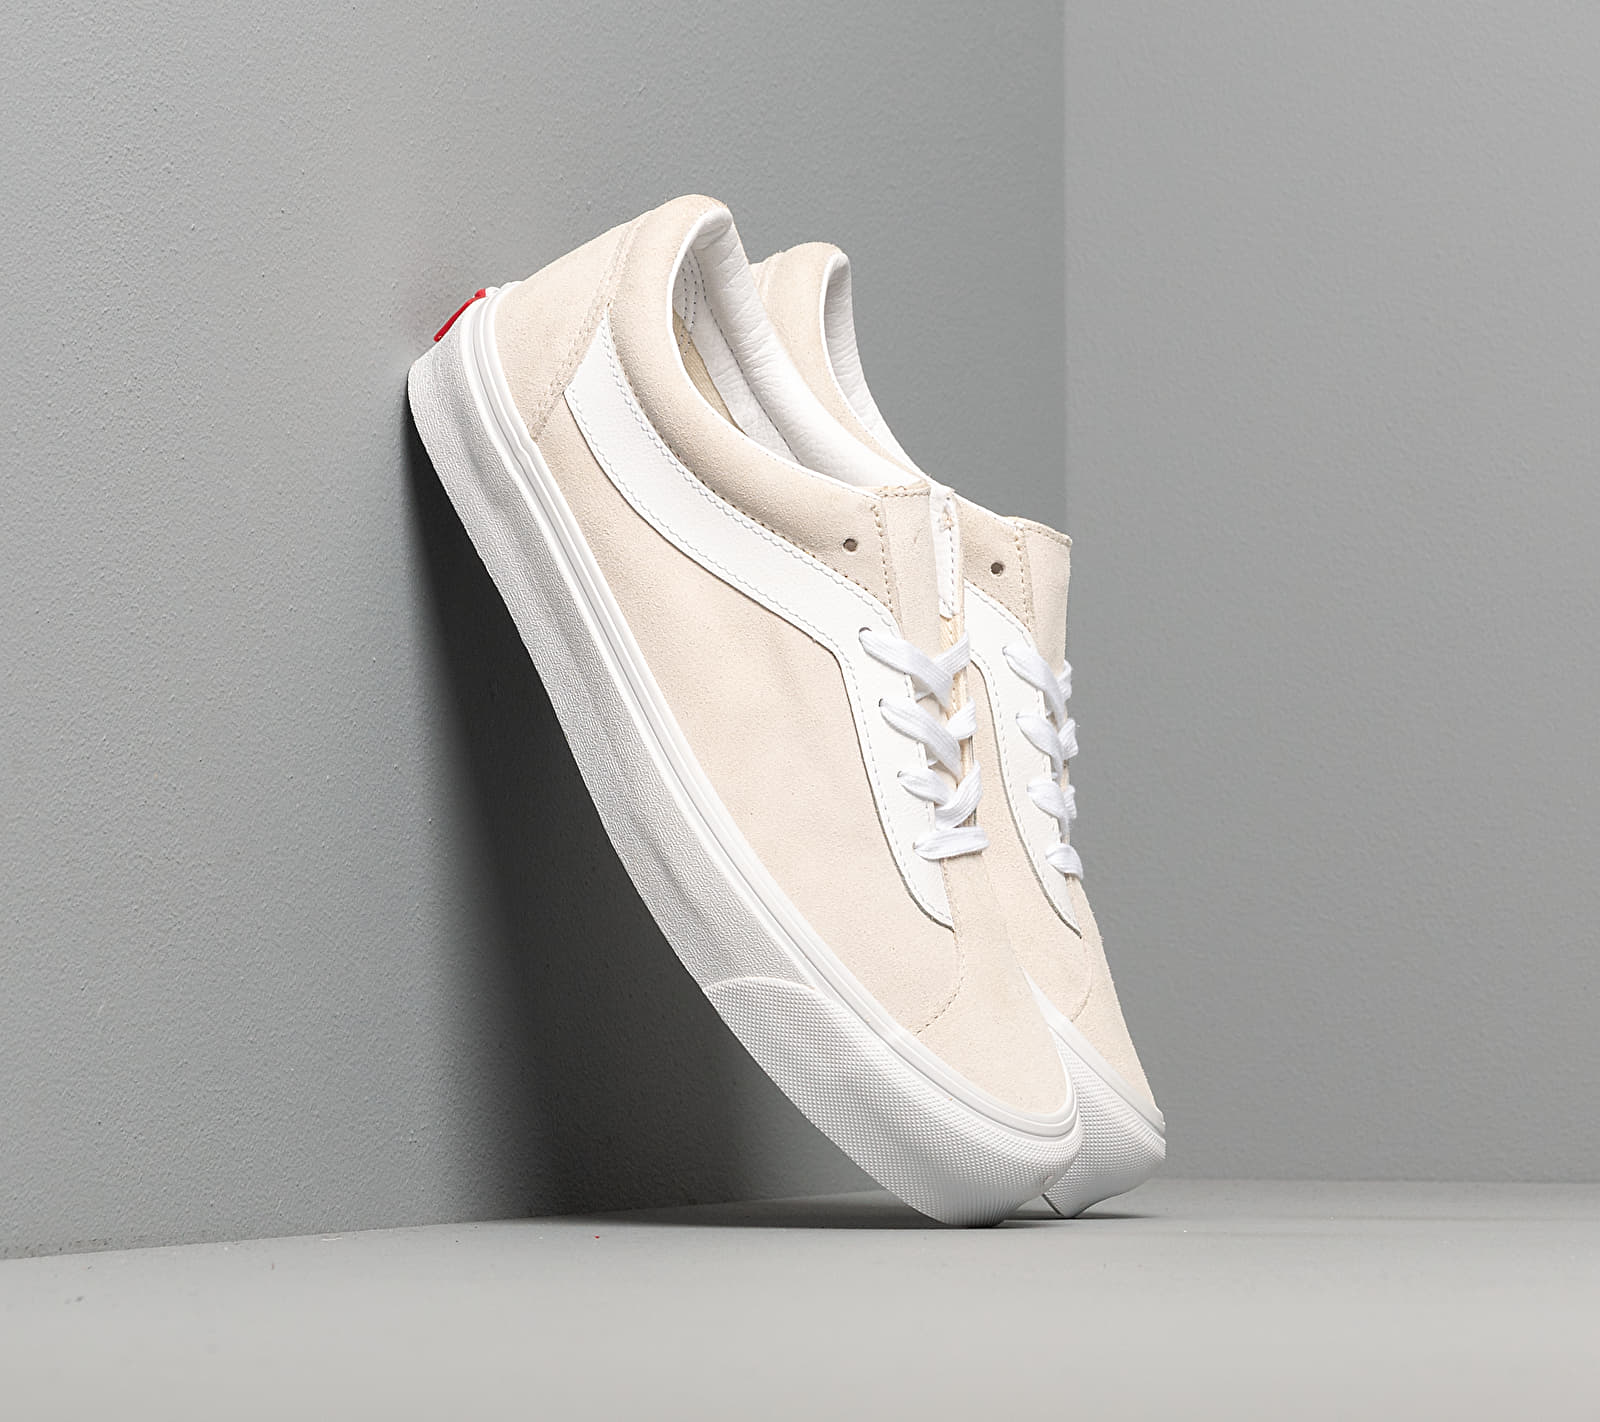 Vans Bold Ni (Suede) Marshmallow VN0A3WLPVLK1